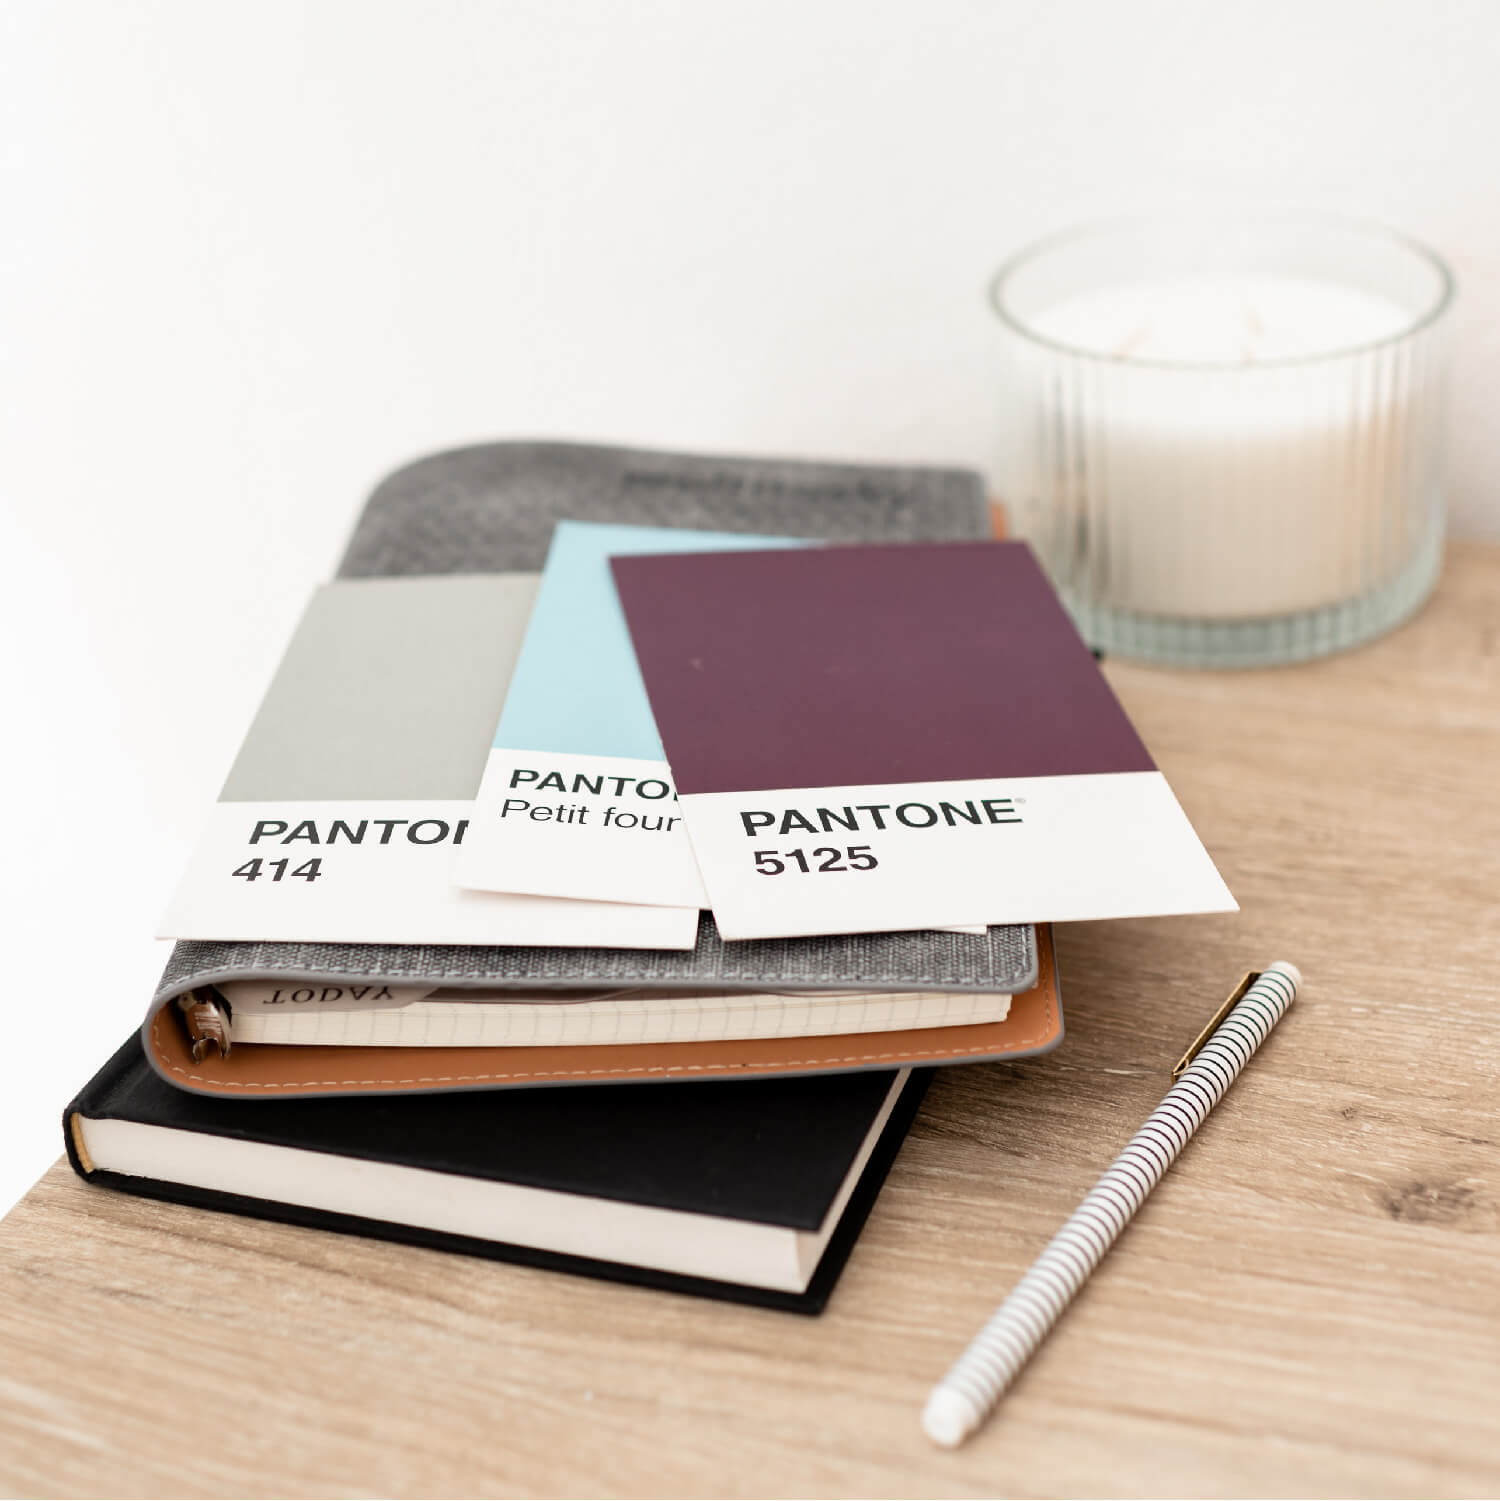 A carefully arranged workspace featuring three Pantone color swatches on top of a notebook, with a silver pen and a candle in the background, symbolizing the thoughtful process of selecting a color palette.